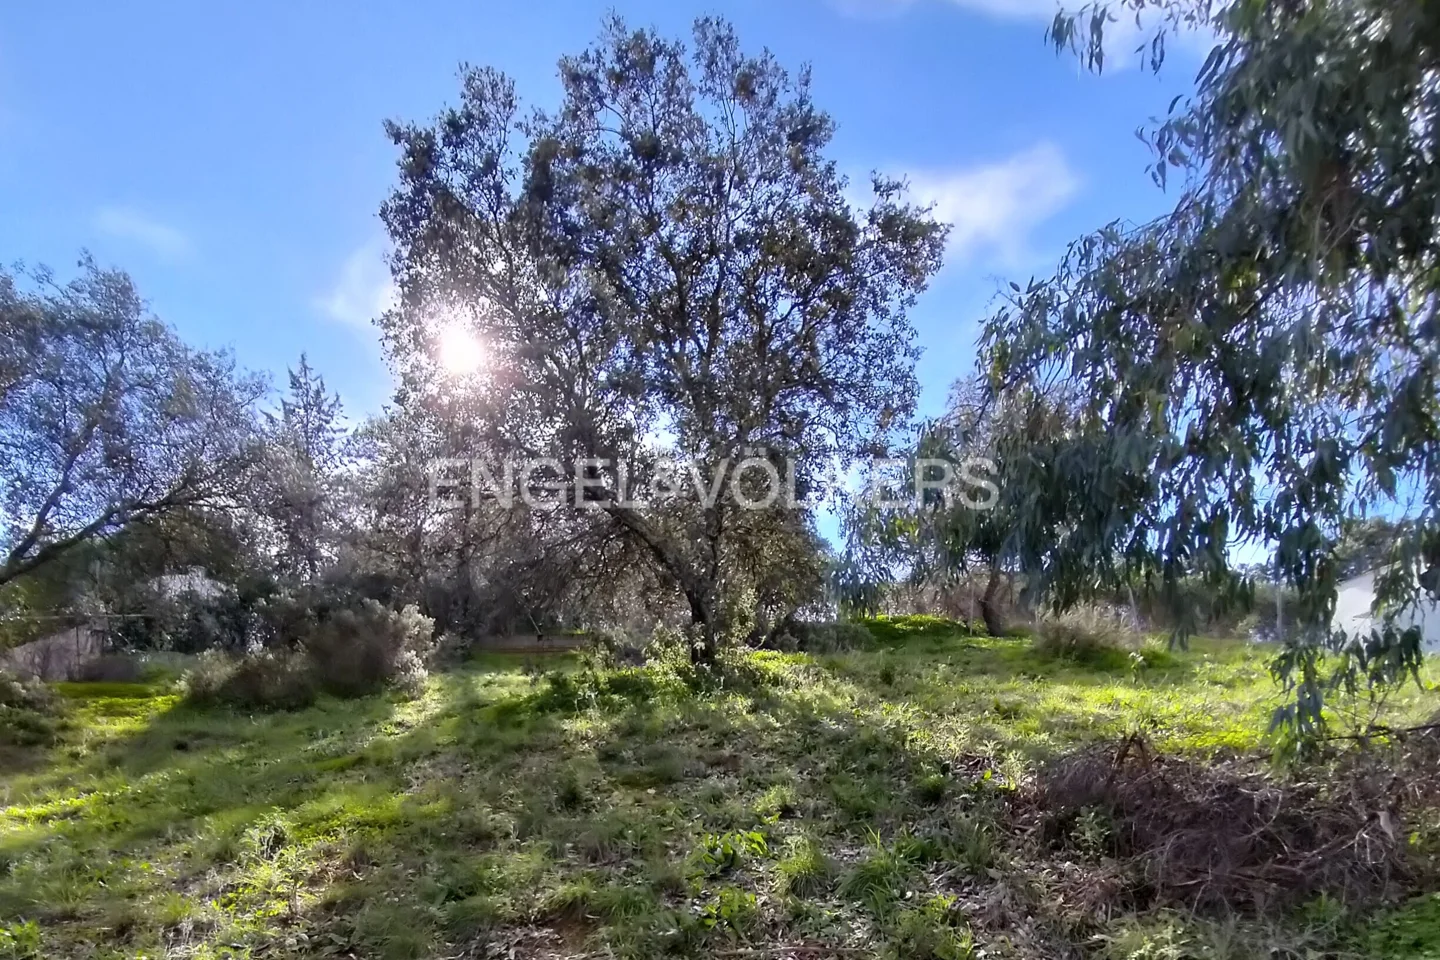 Plot for the house of your dreams with views of nature, half an hour from Sevilla.